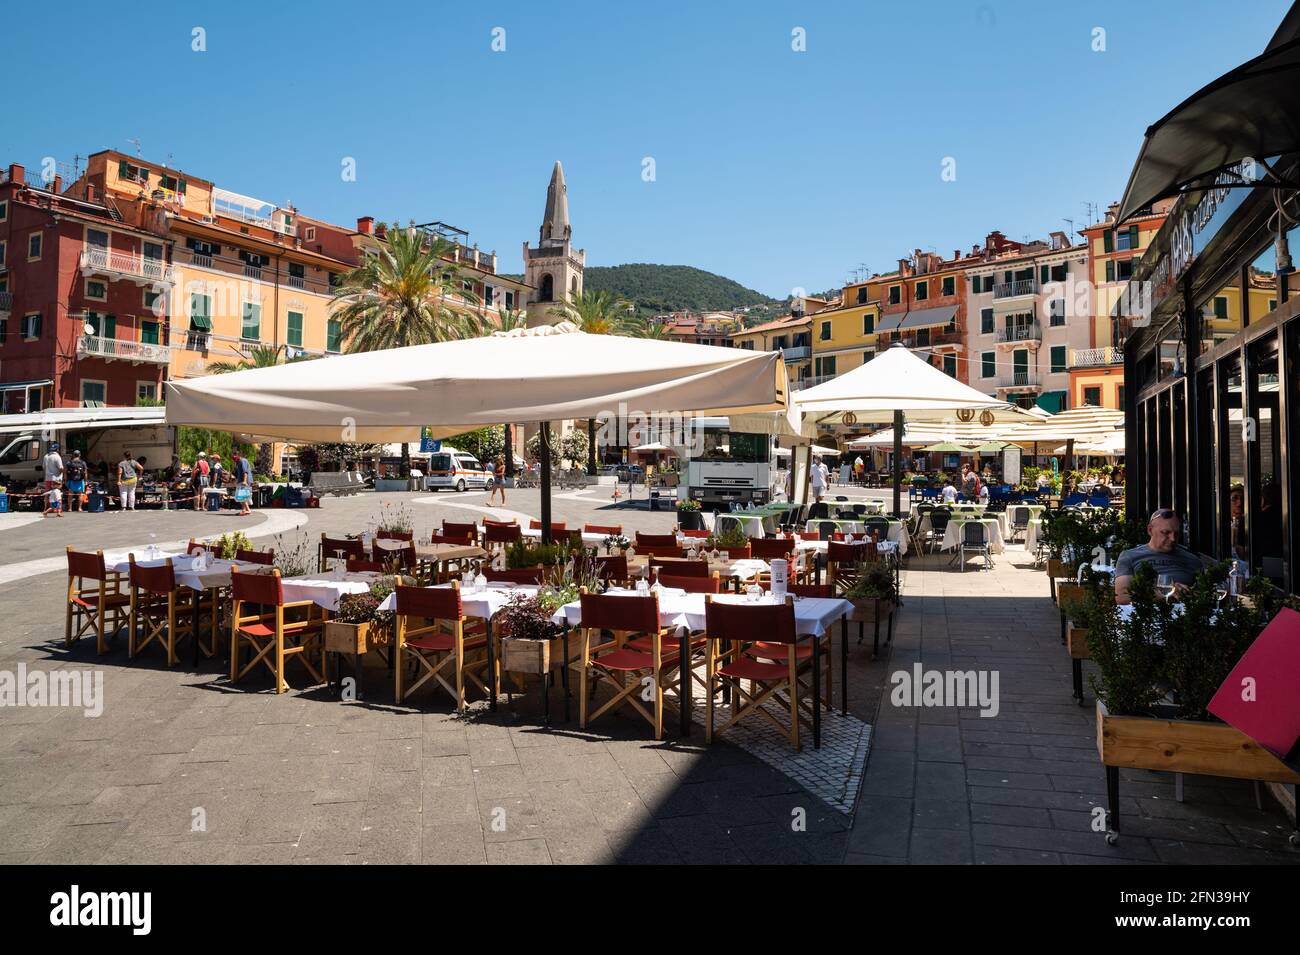 Lerici, Liguria, Italy. June 2021. The colorful houses and the bell tower overlook the square of the seaside village. The restaurants have umbrellas a Stock Photo